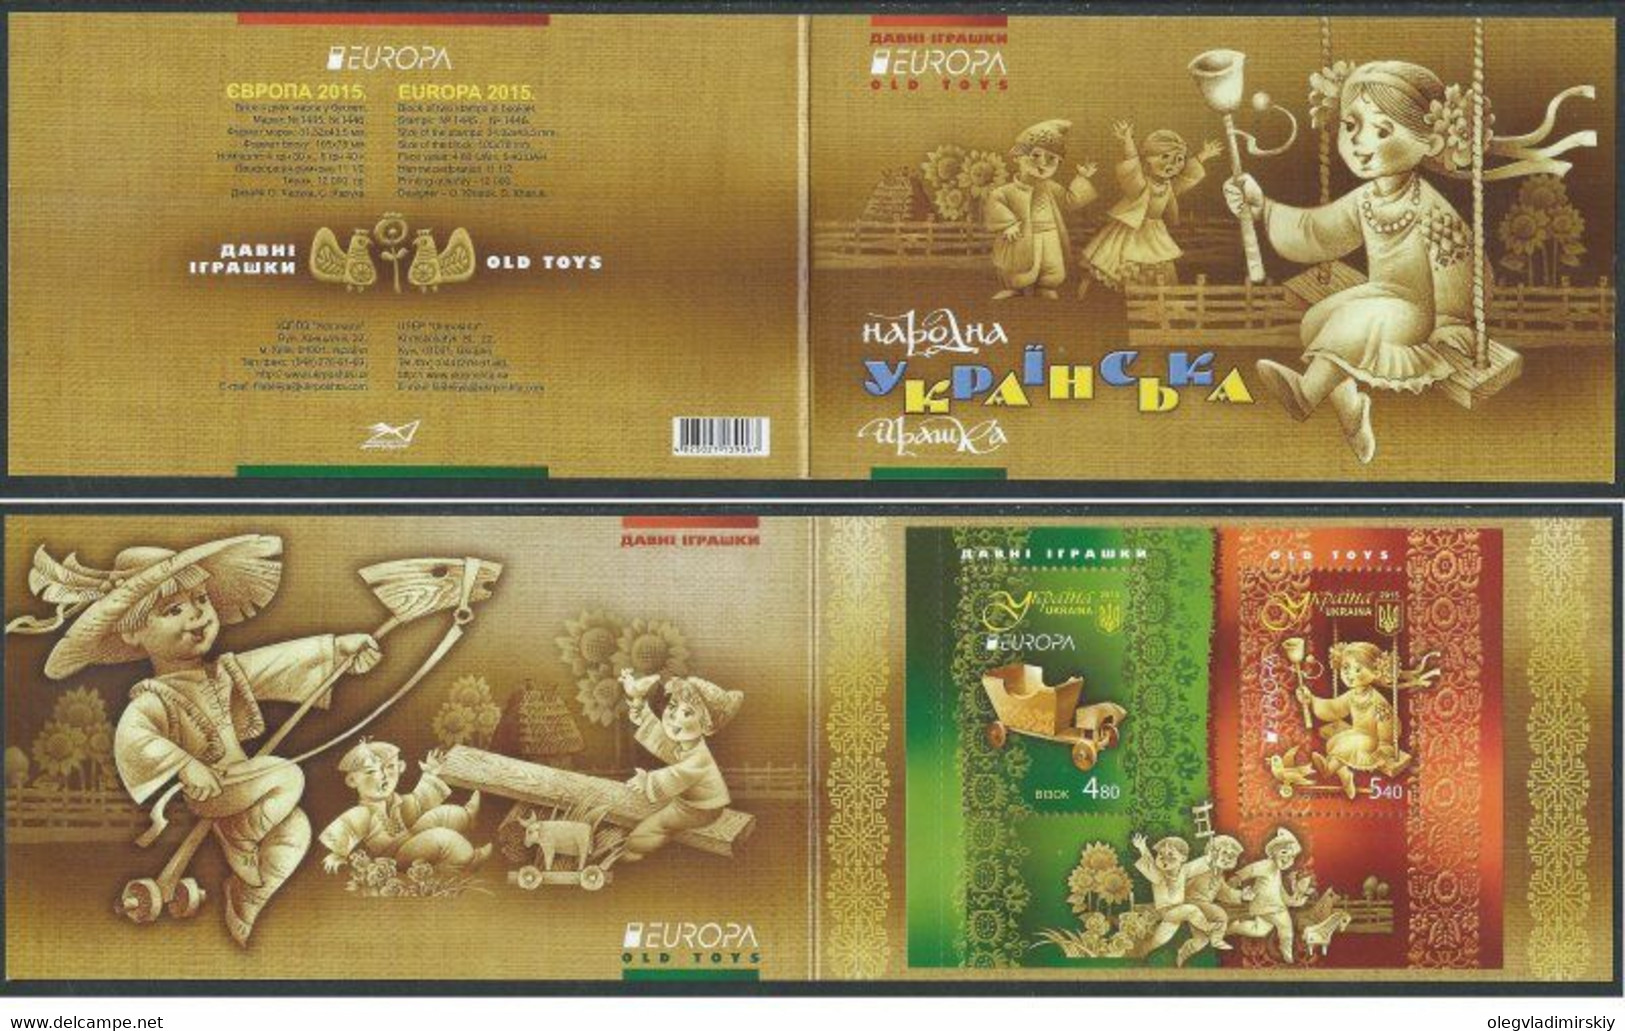 Ukraine 2015 Europa CEPT Old Toys Limited Edition Block In Booklet - Dolls